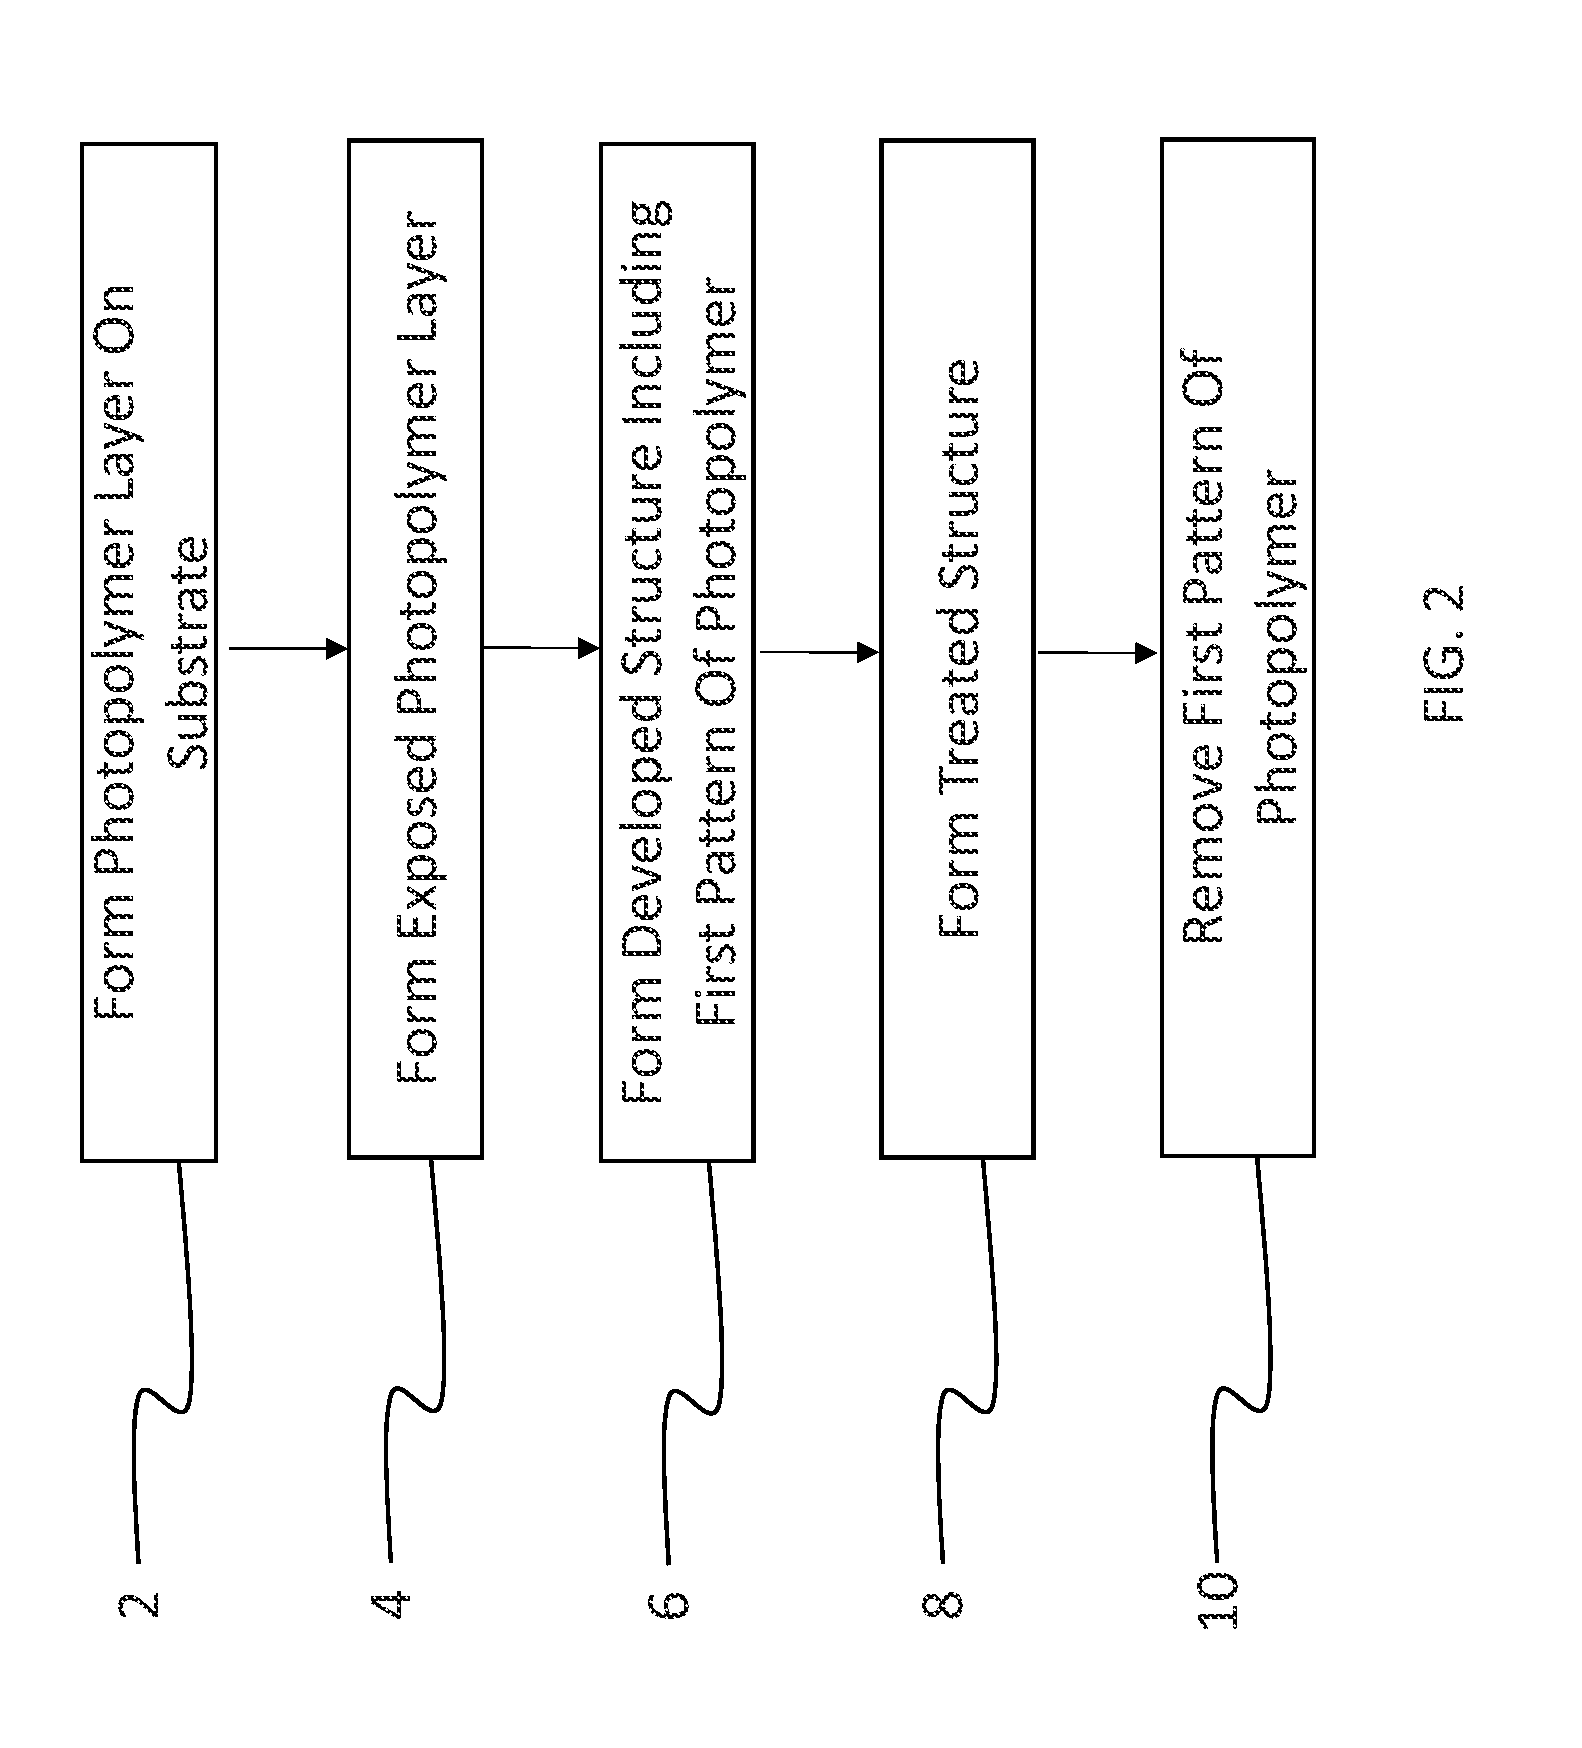 Method of patterning a device